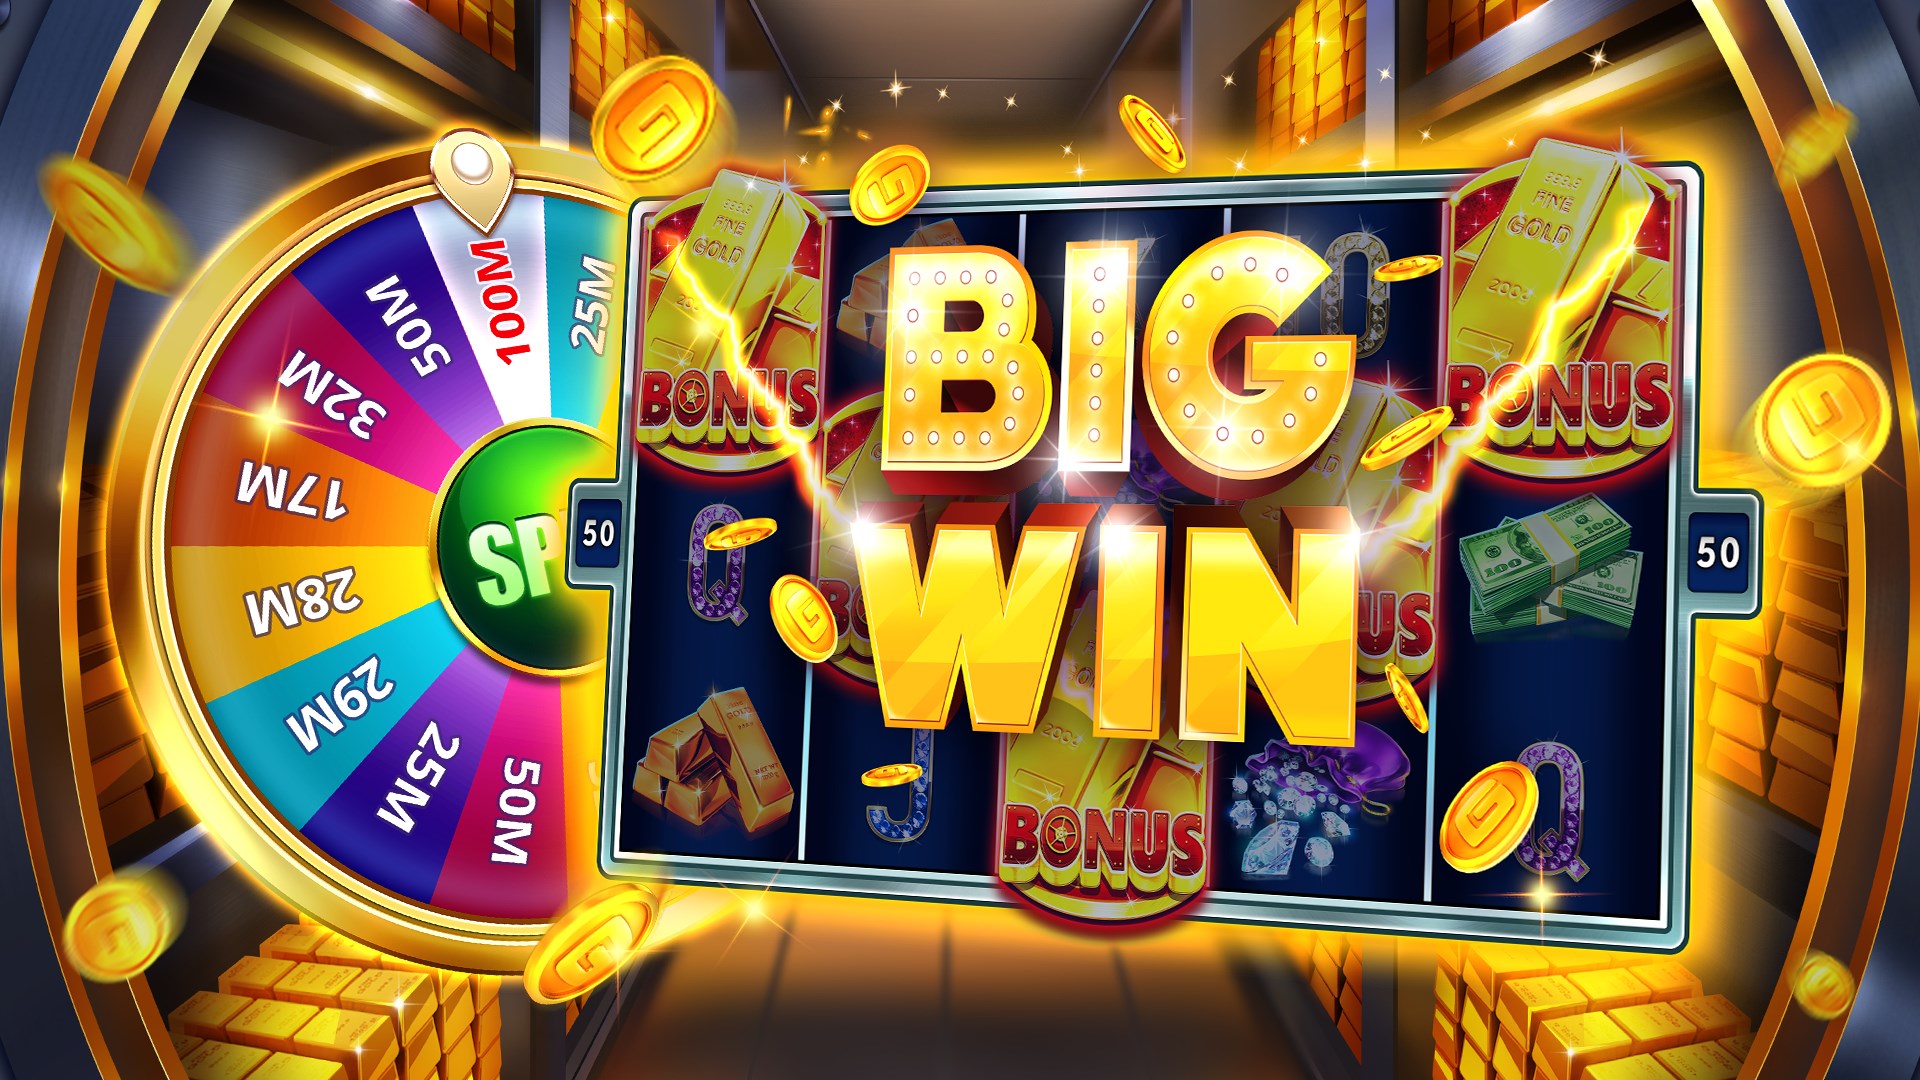 Direct Web Slots Domination Easy Wins, Big Payouts